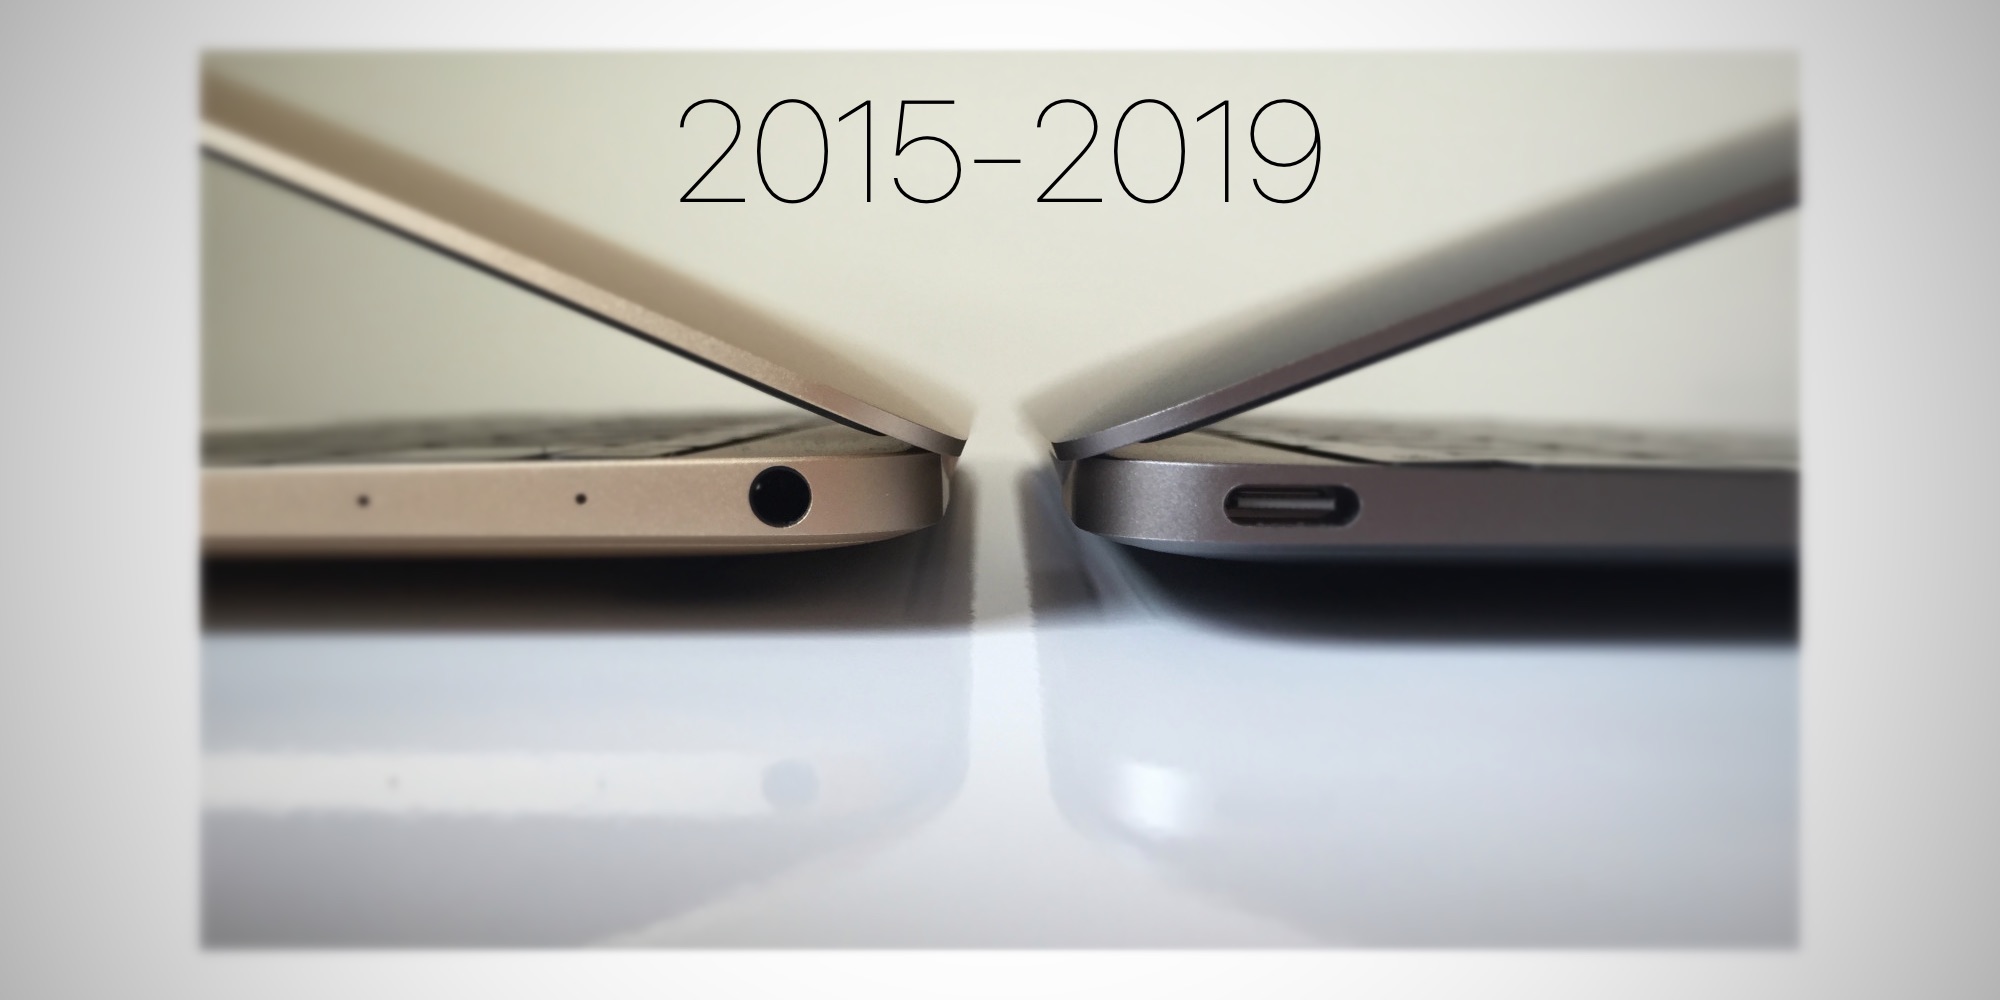 Discontinued 12-inch MacBook gone without a true upgrade - 9to5Mac